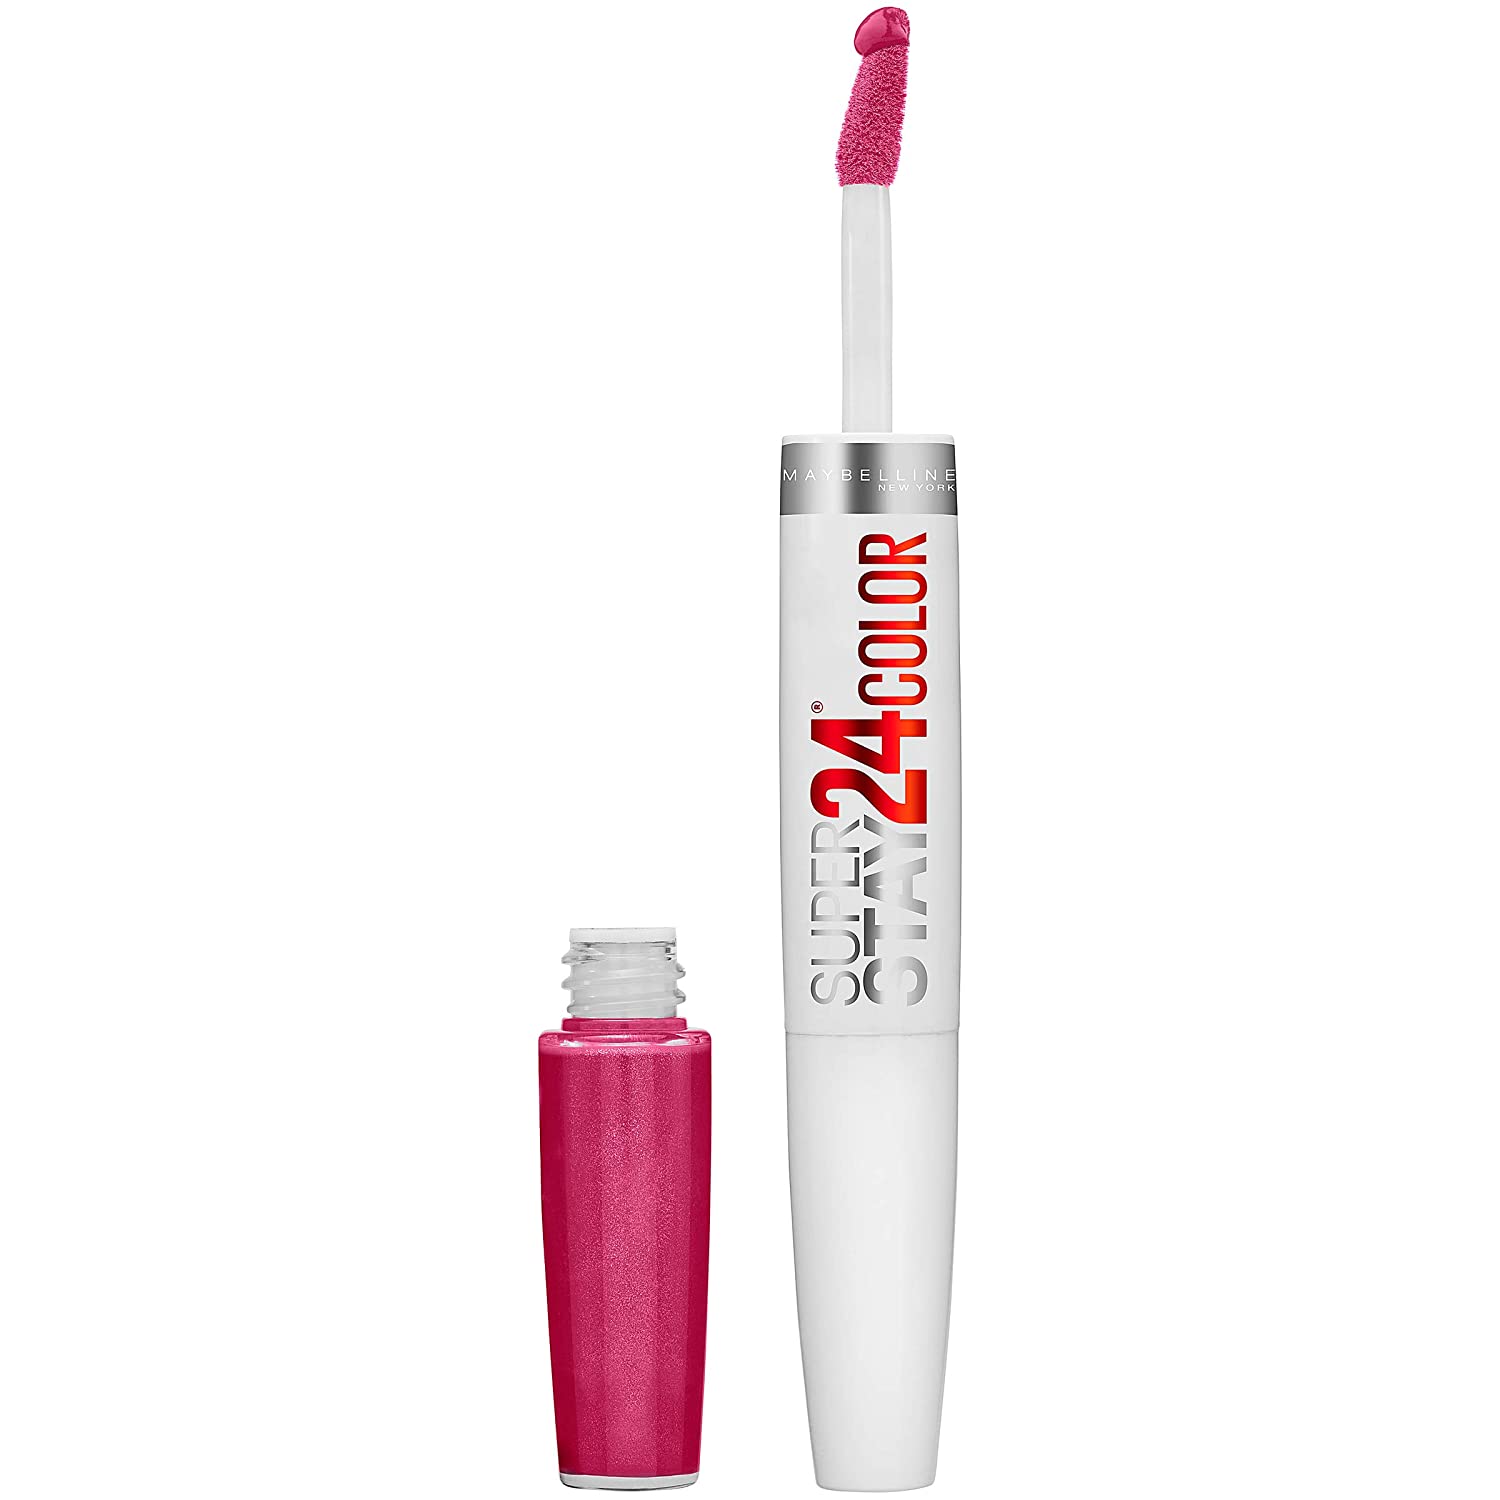 ''Maybelline SuperStay 24 2-Step Liquid LIPSTICK Makeup, Reliable Raspberry, 1 kit''